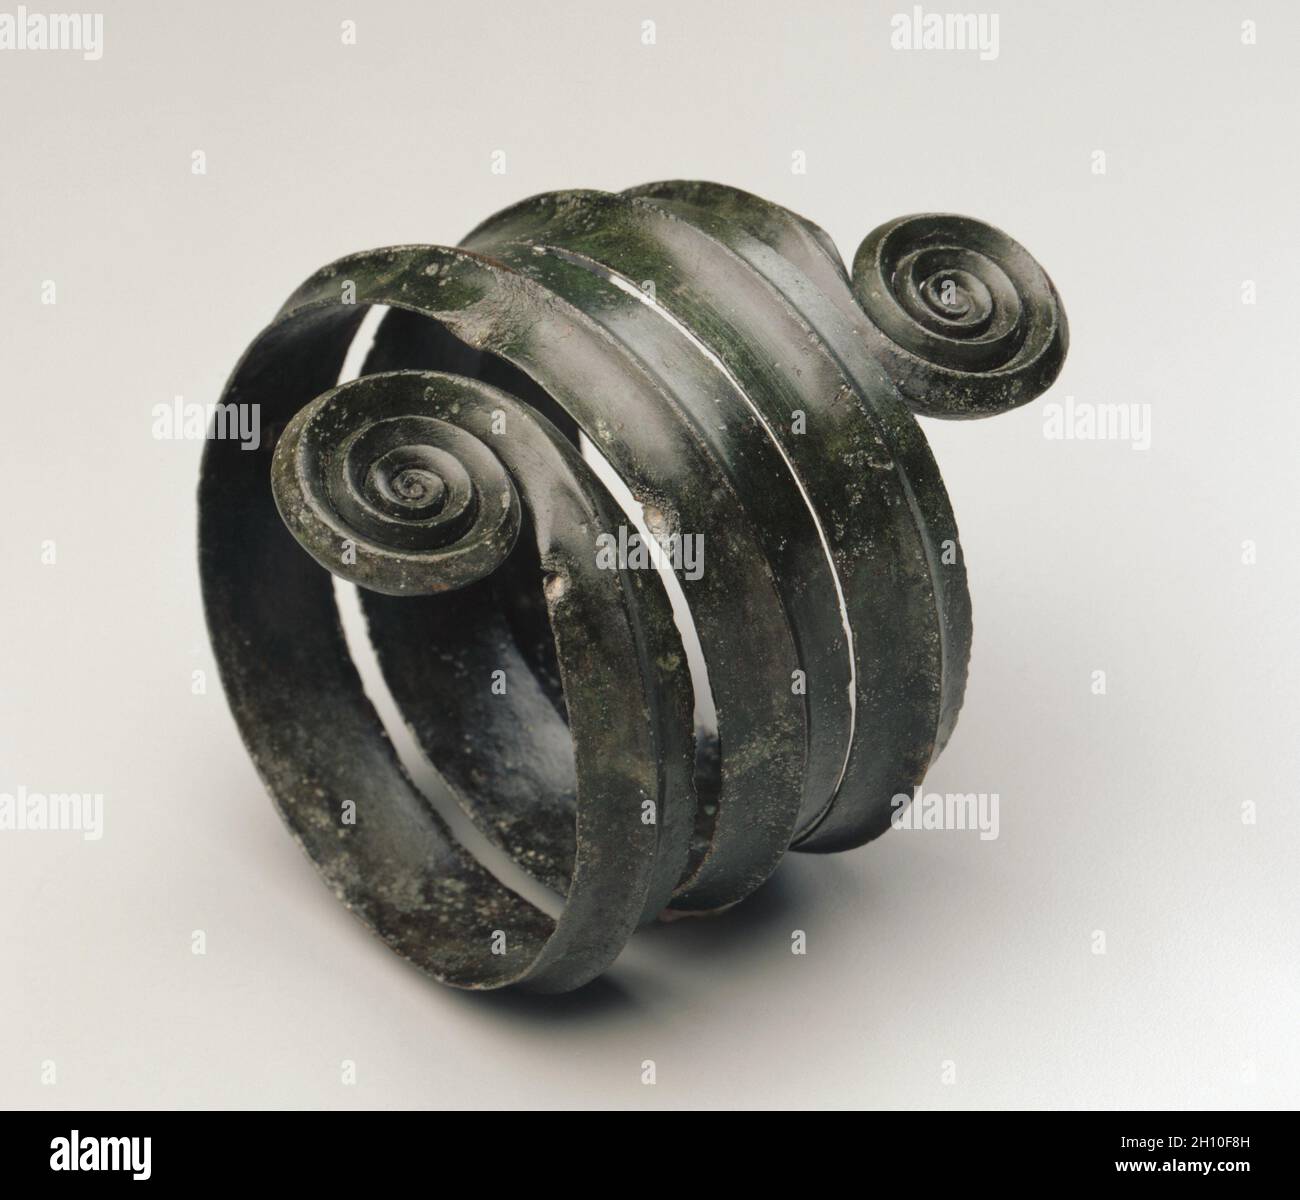 Turned Armilla, c. 1500 BC. Hungary, Bronze Age, c. 2500-800 BC. Bronze, wrought; overall: 12.5 x 10.4 cm (4 15/16 x 4 1/8 in.). Stock Photo